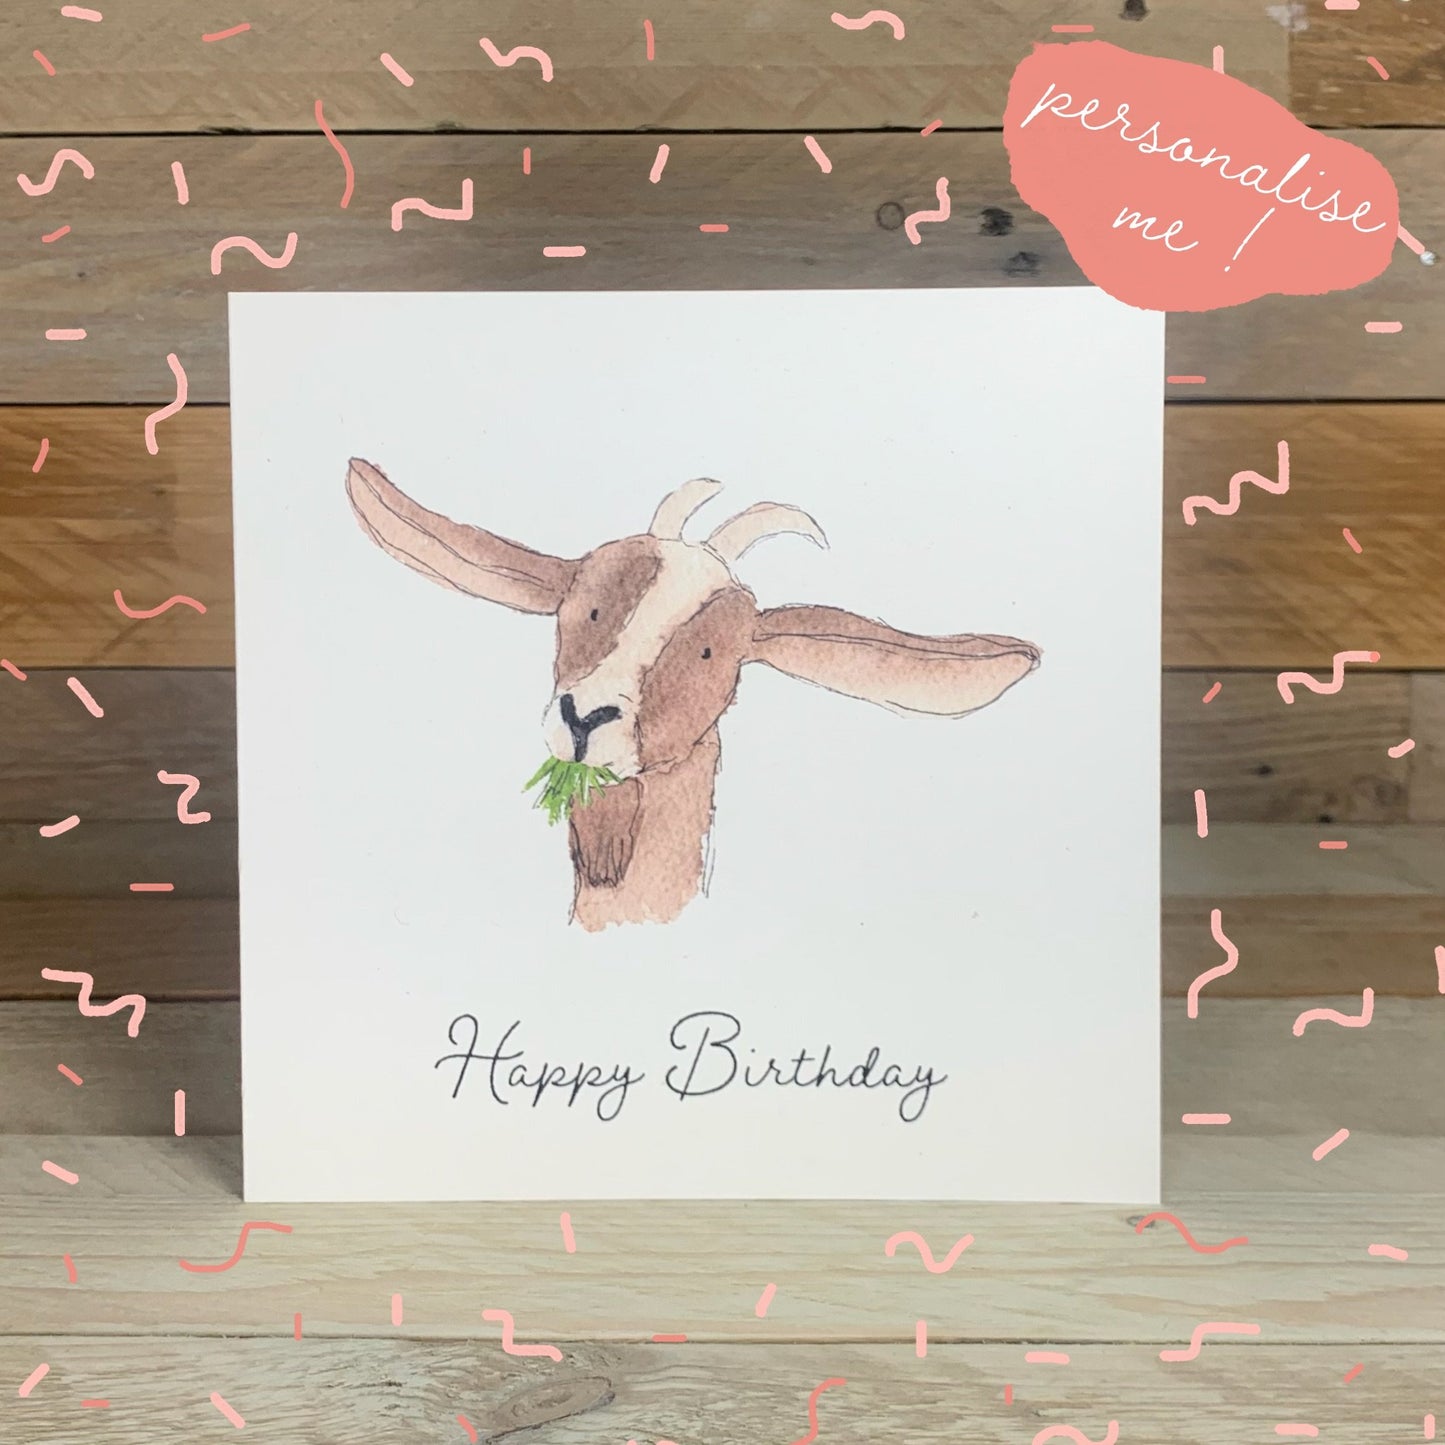 Gary the Goat Birthday Card - Arty Bee Designs 